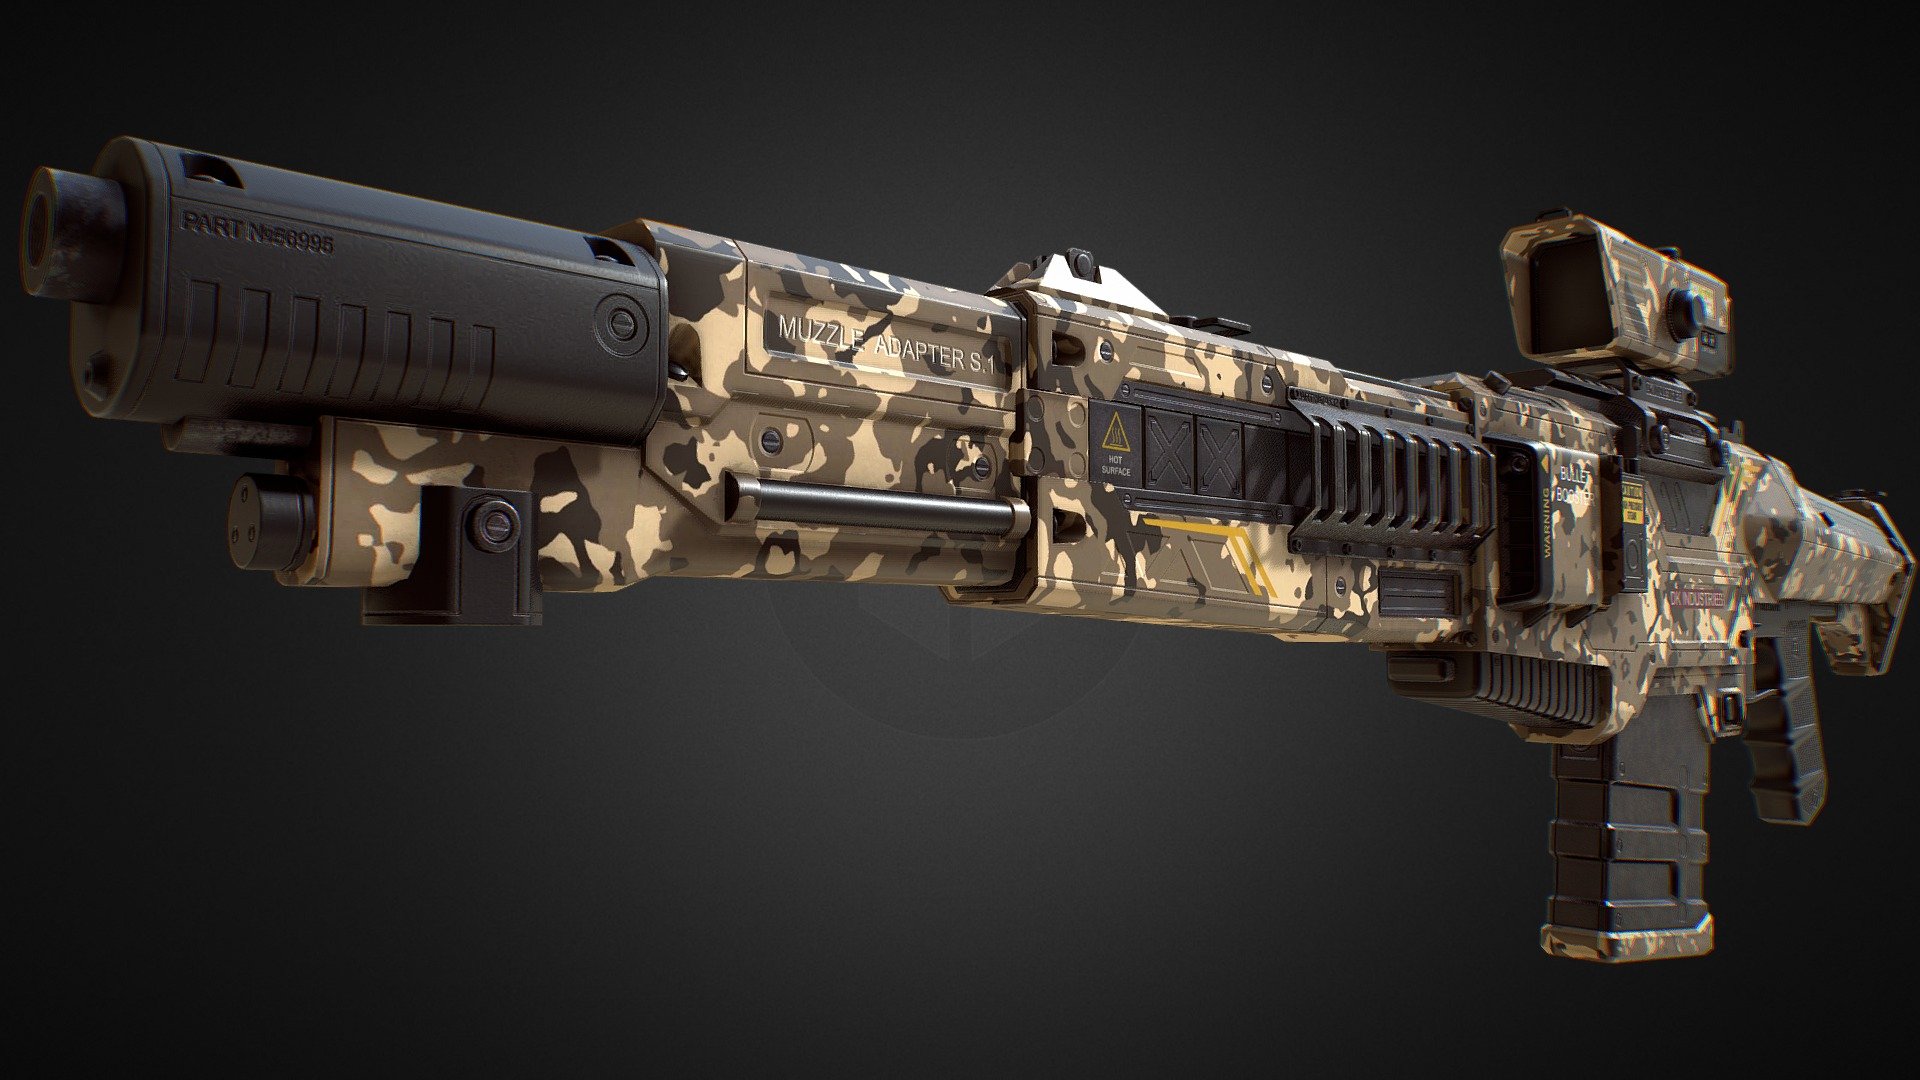 PBR Modular Assault Rifle from Sci-Fi weapon pack 
Unity Assetstore:   PBR SciFi Weapons v2
CG trader:   PBR SciFi Weapons v2
With movable parts and hires textures - PBR Assault Rifle (Cammo Skin 2) - 3D model by Dmitrii_Kutsenko (@Dmitrii_Kutcenko) 3d model